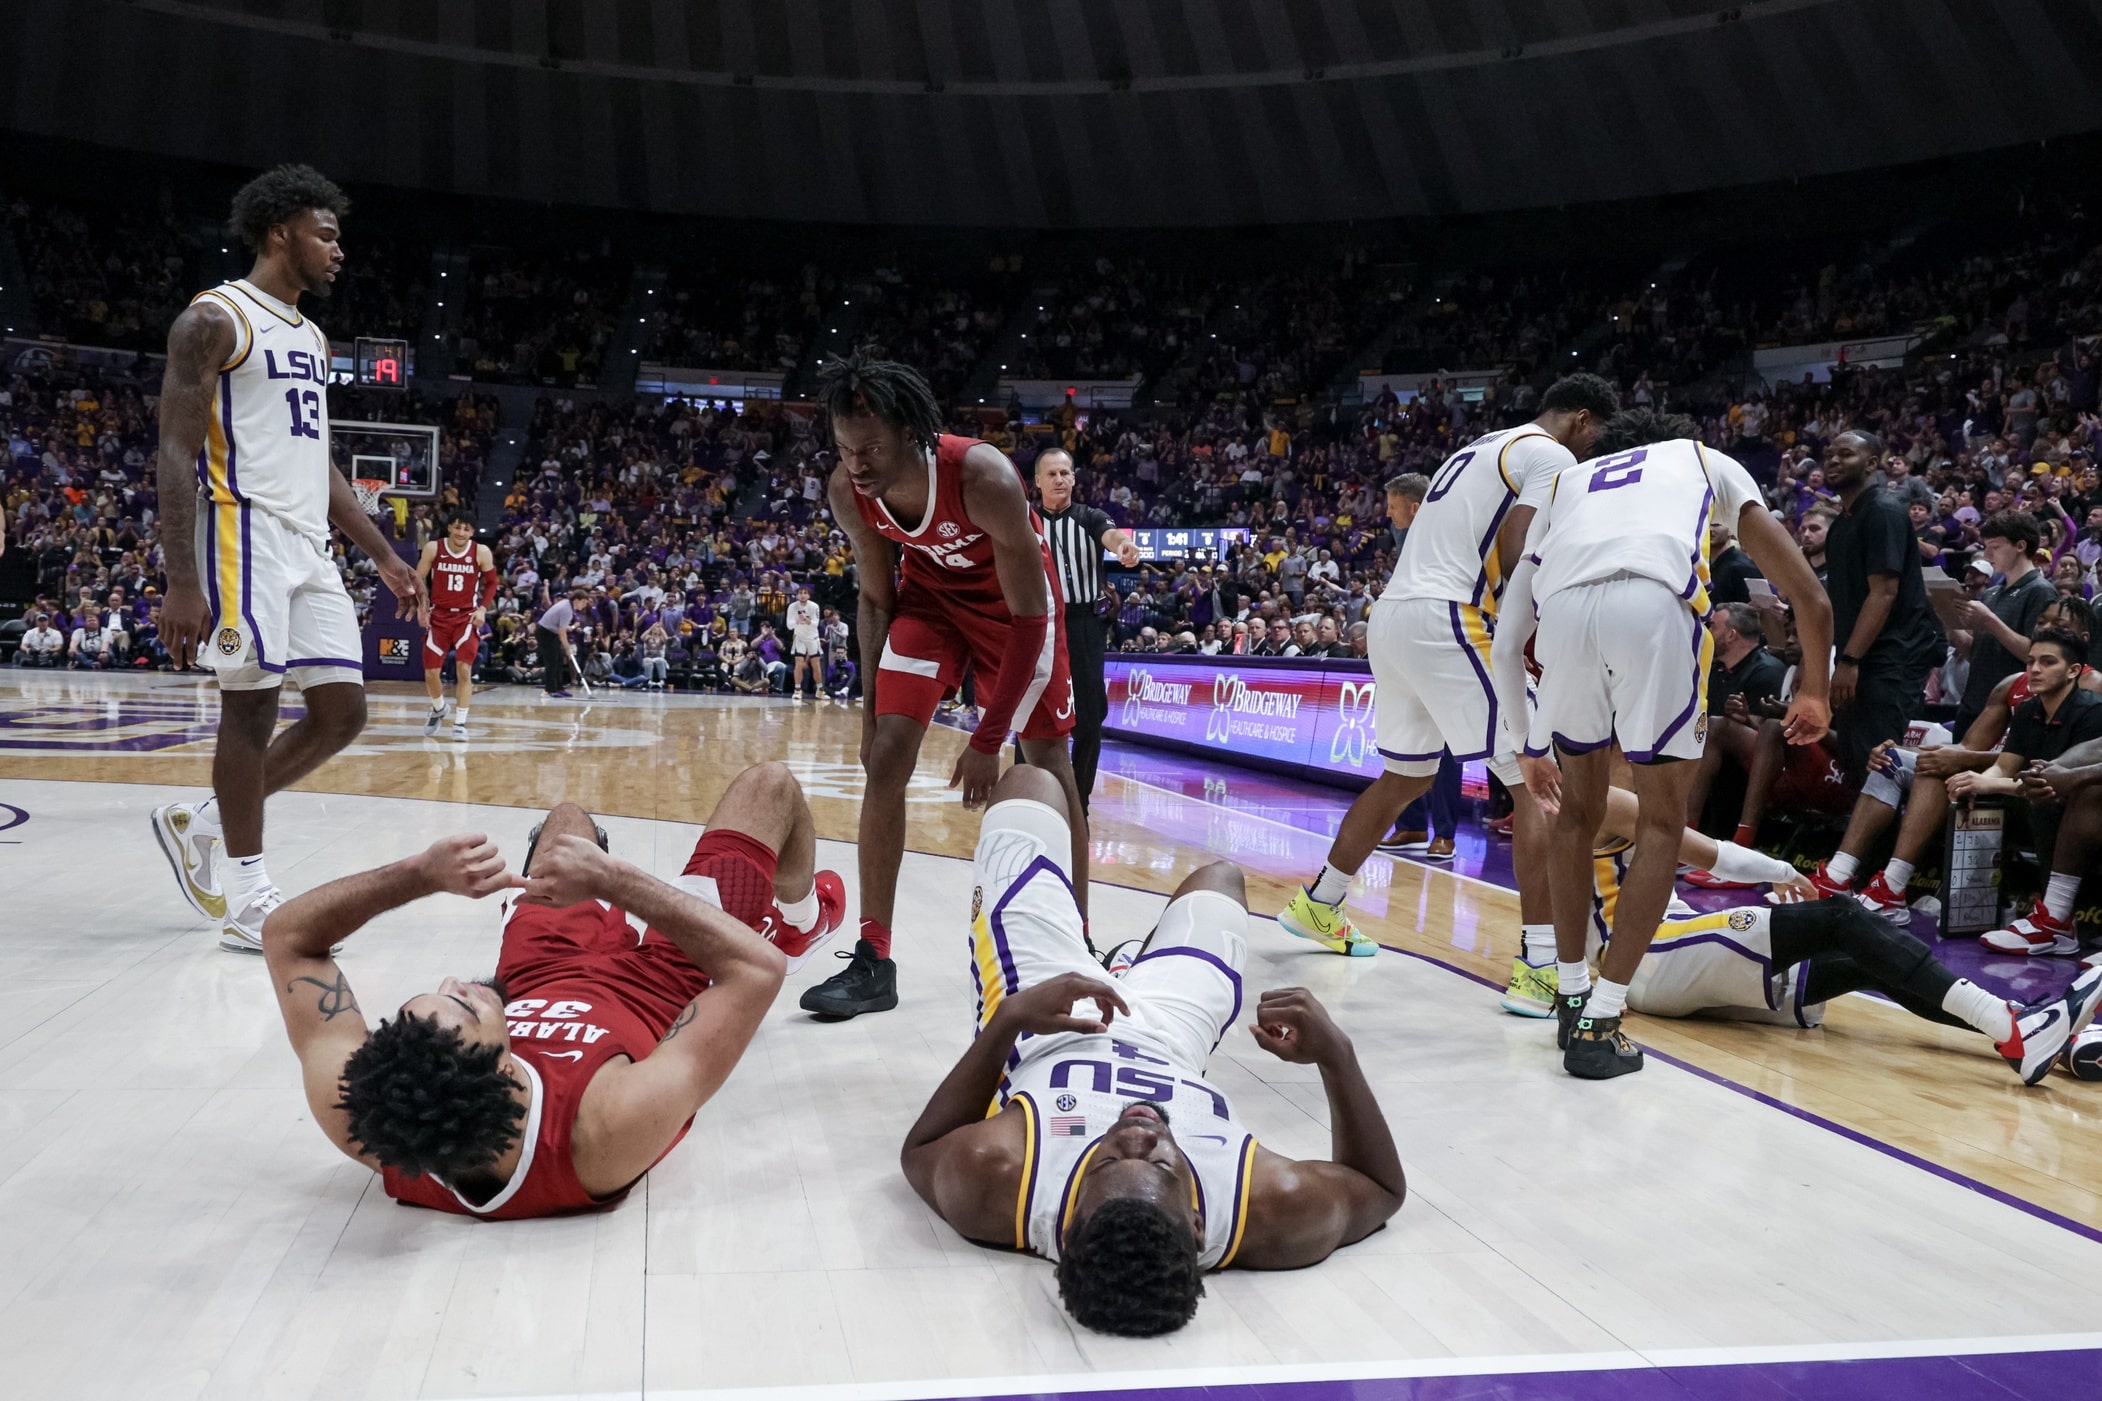 Mar 5, 2022; Baton Rouge, Louisiana, USA; Alabama Crimson Tide forward James Rojas (33) reacts to fouling LSU Tigers forward Darius Days (4) during the second half at the Pete Maravich Assembly Center.